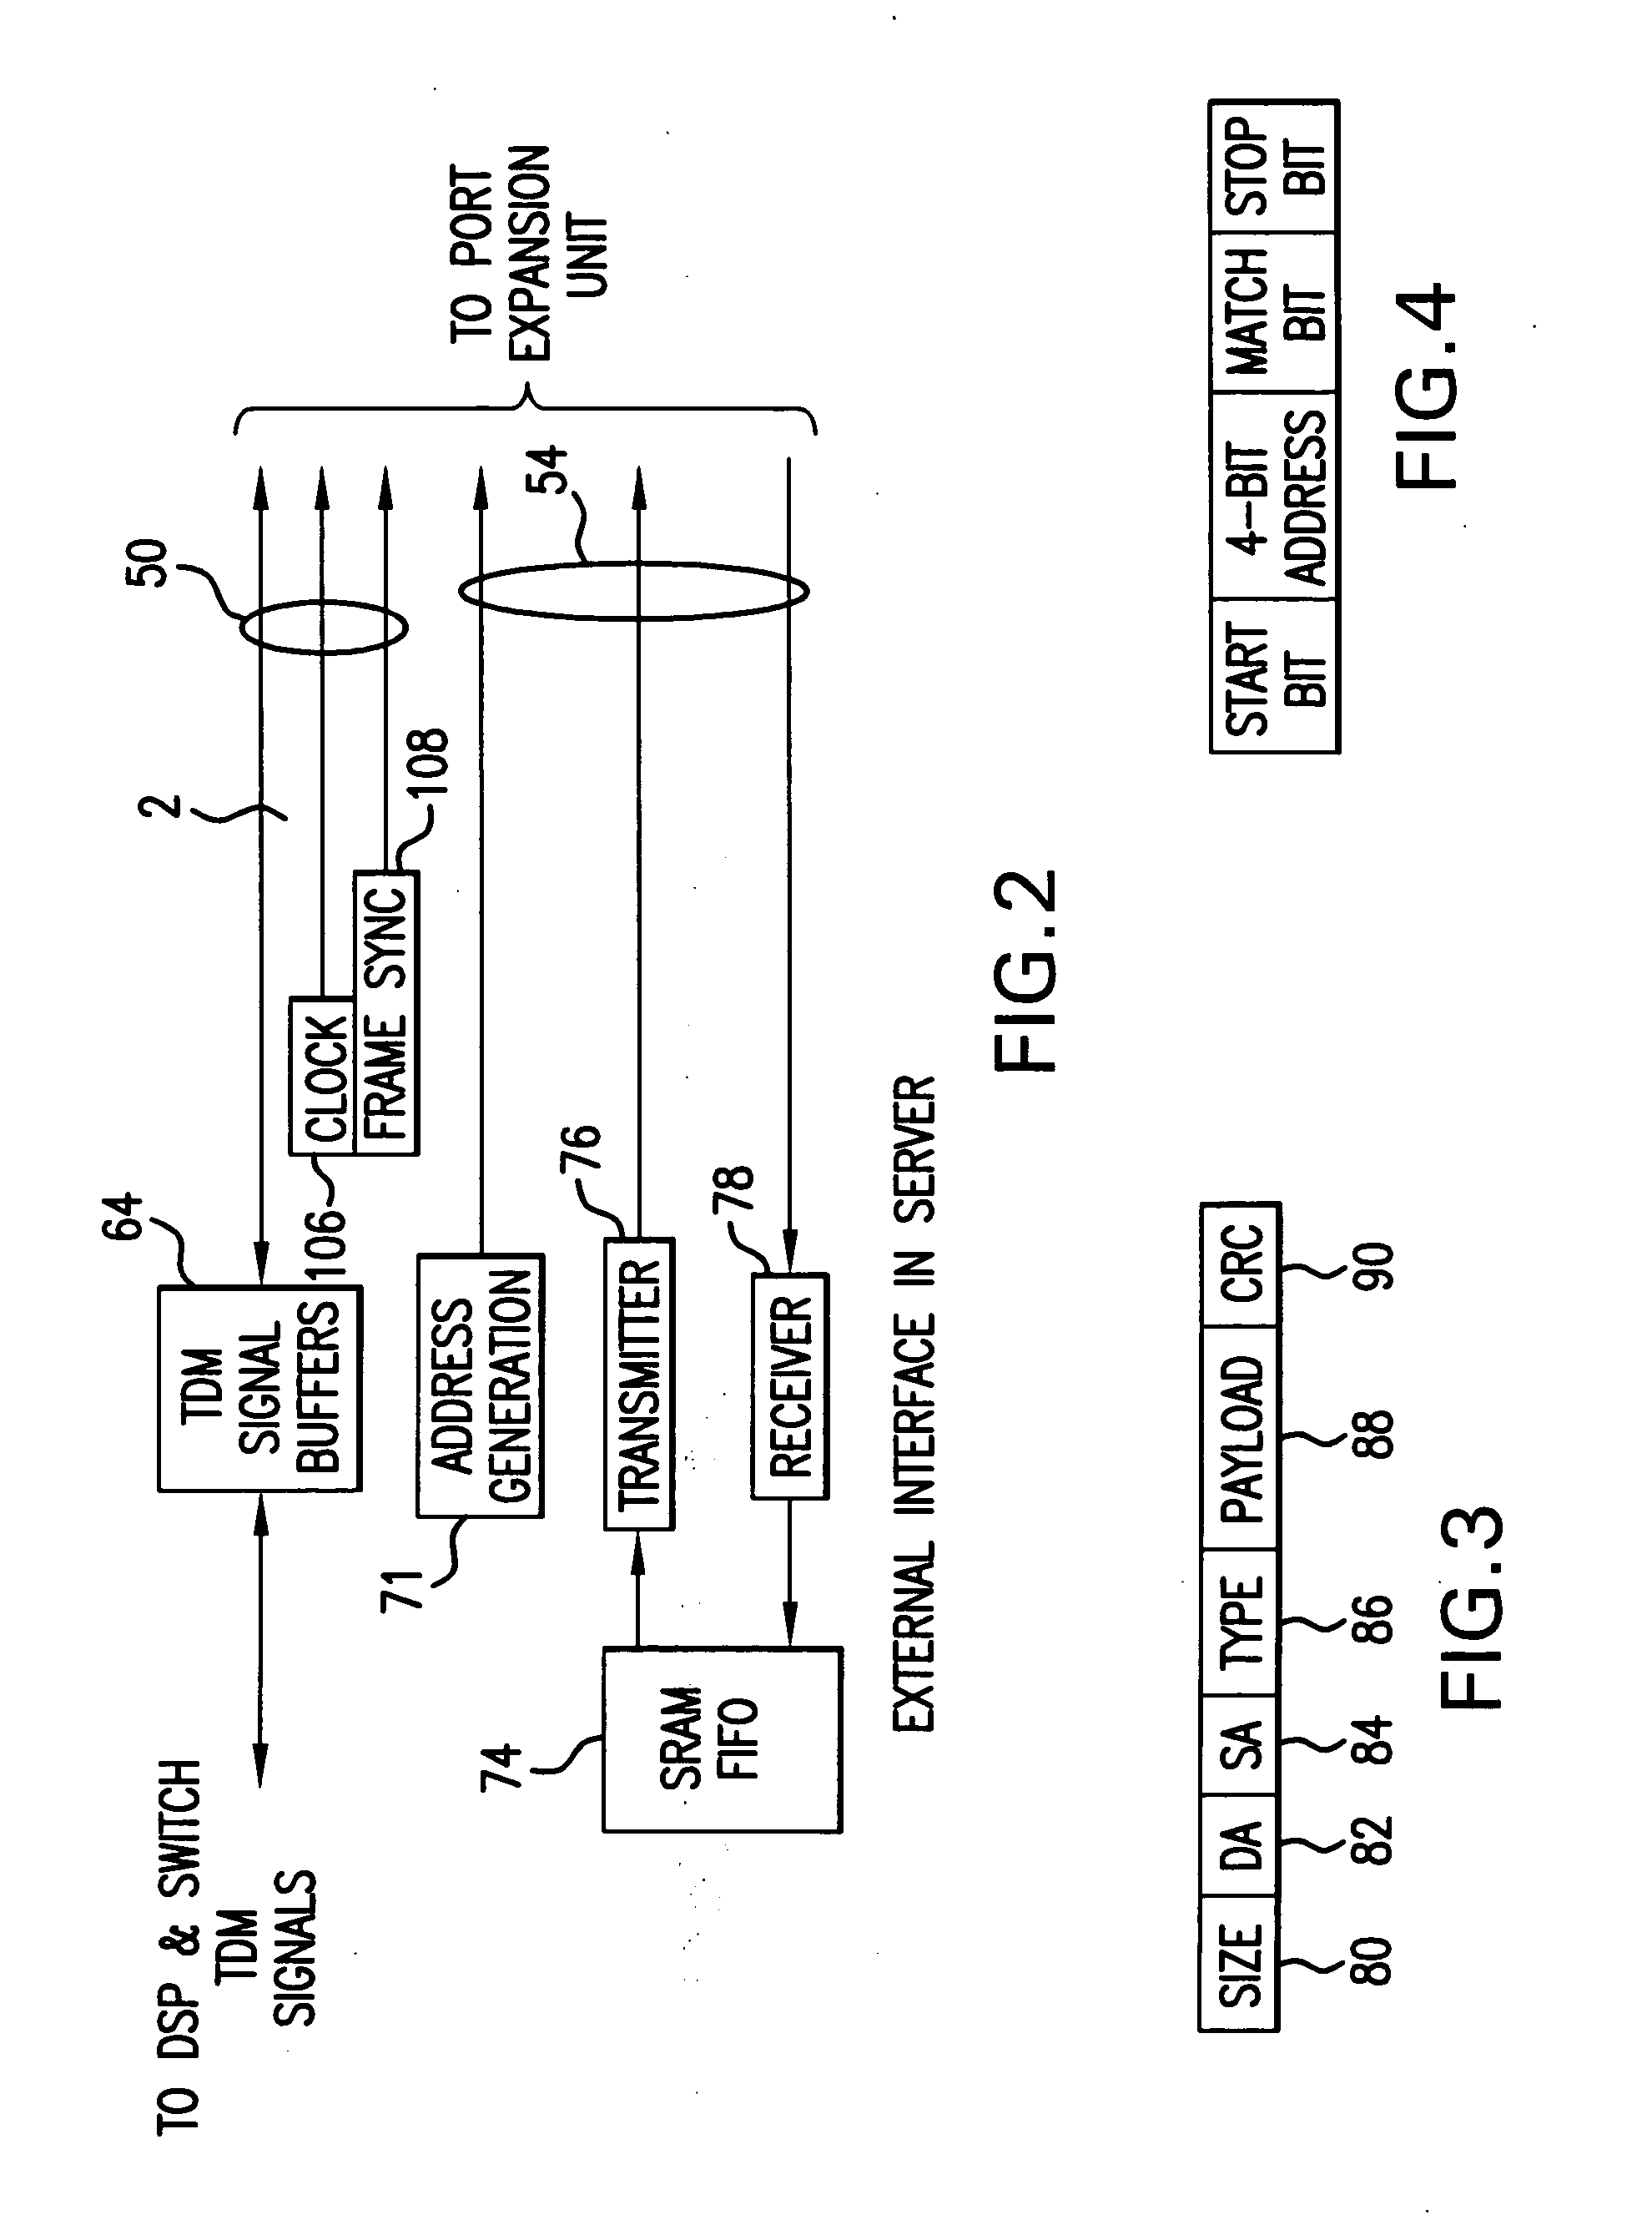 IP packet ready PBX expansion circuit for a conventional personal computer with expandable, distributed DSP architecture